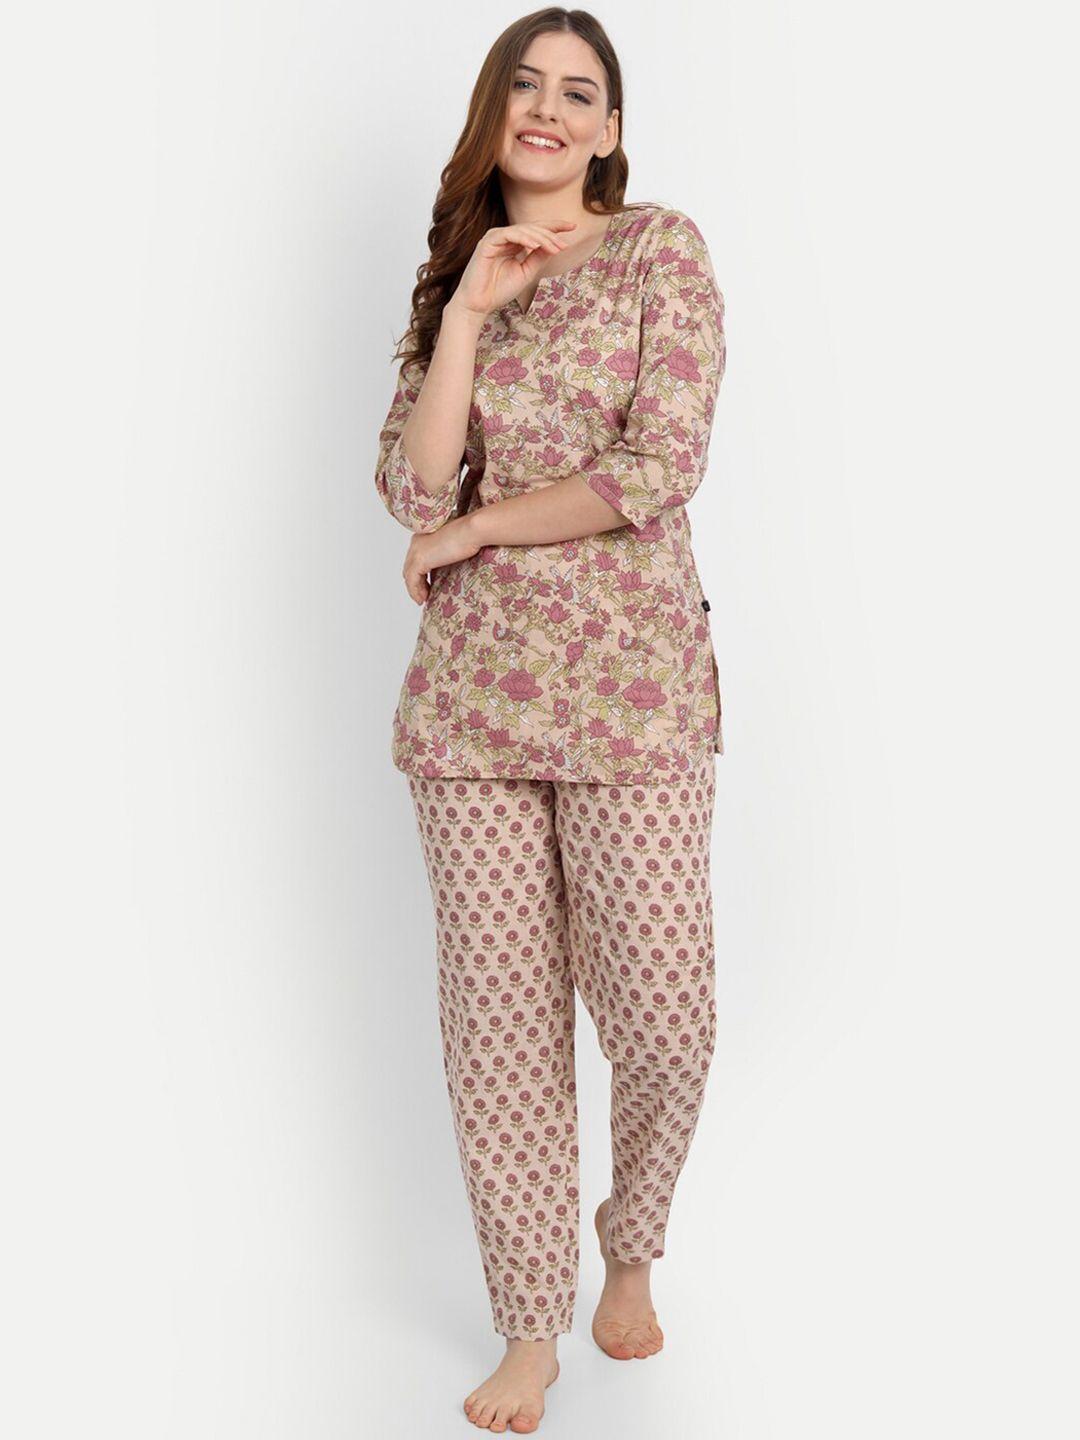 githaan women floral printed pure cotton night suit